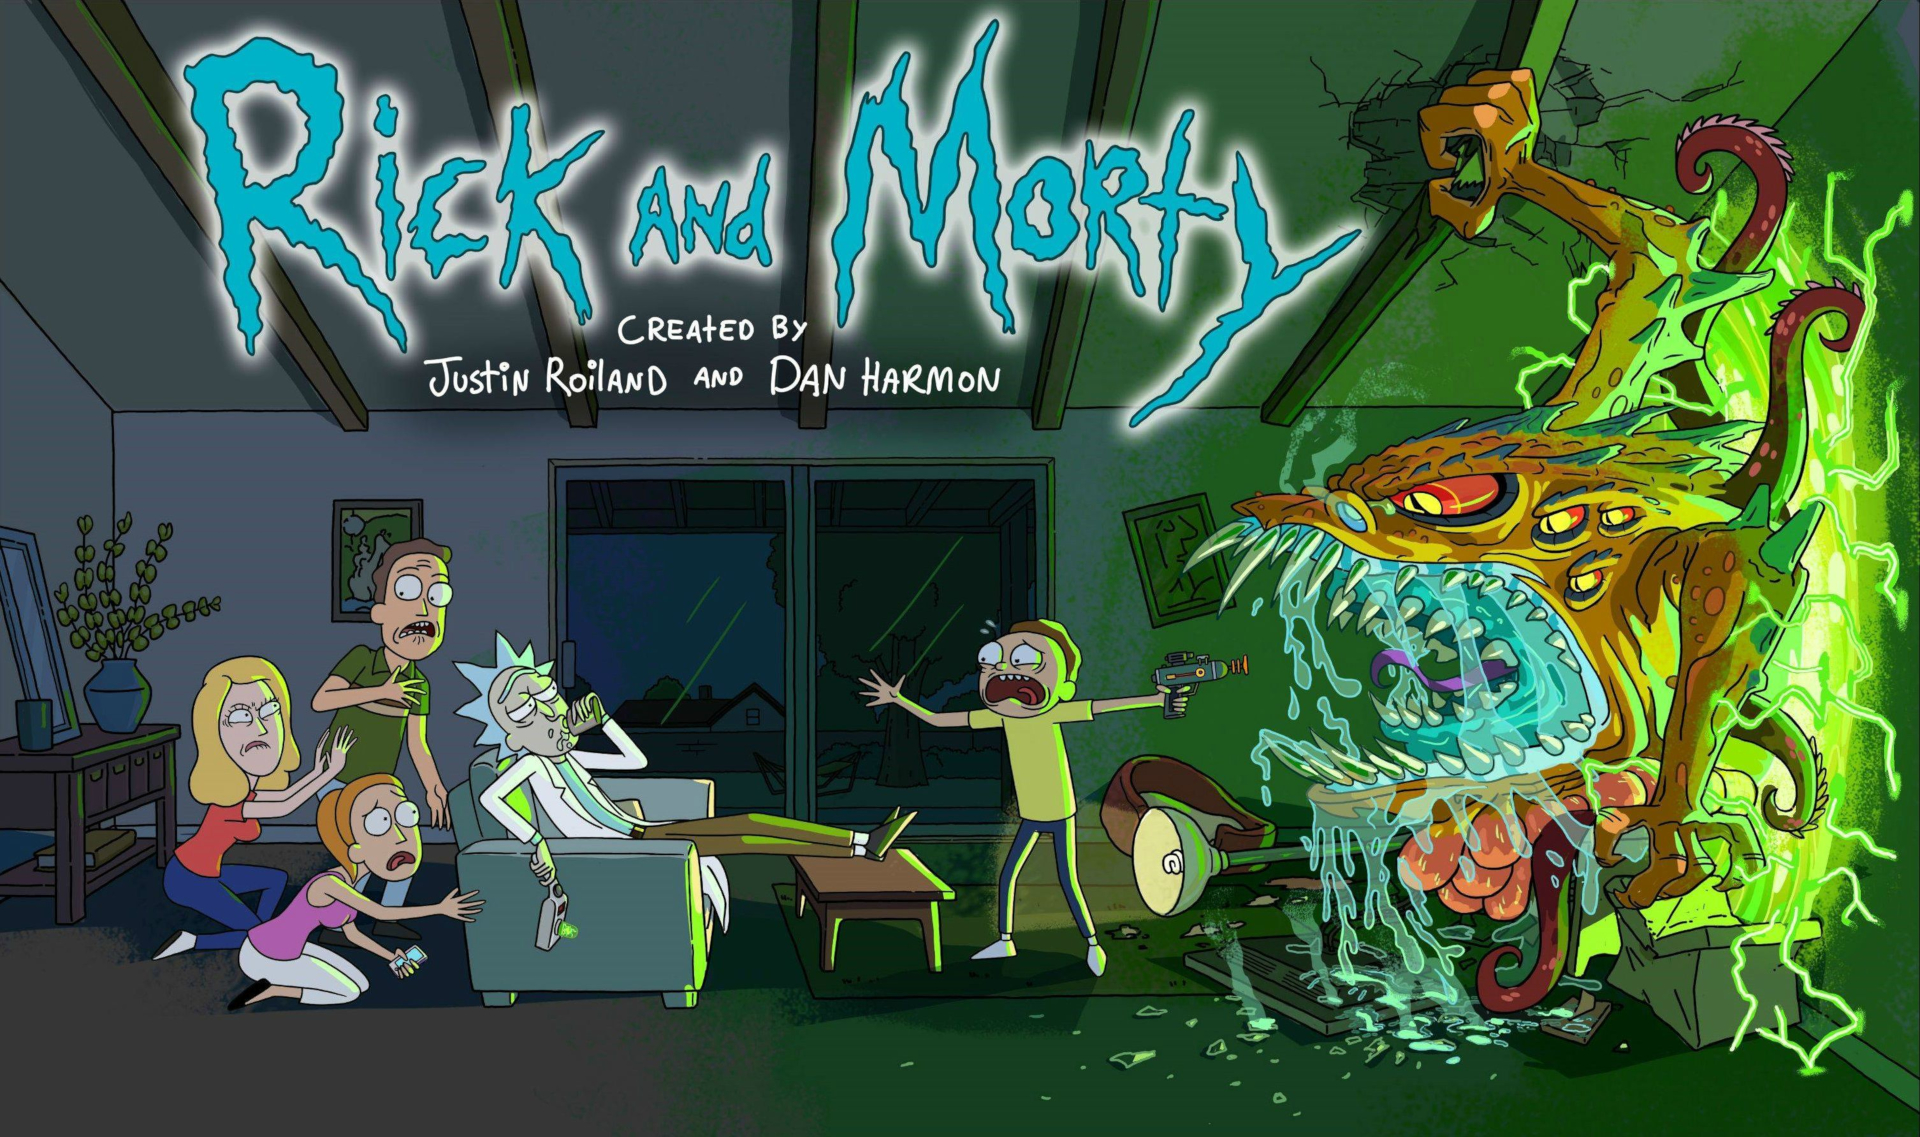 Rick and Morty Wallpapers - Top Best 85 Rick and Morty Backgrounds